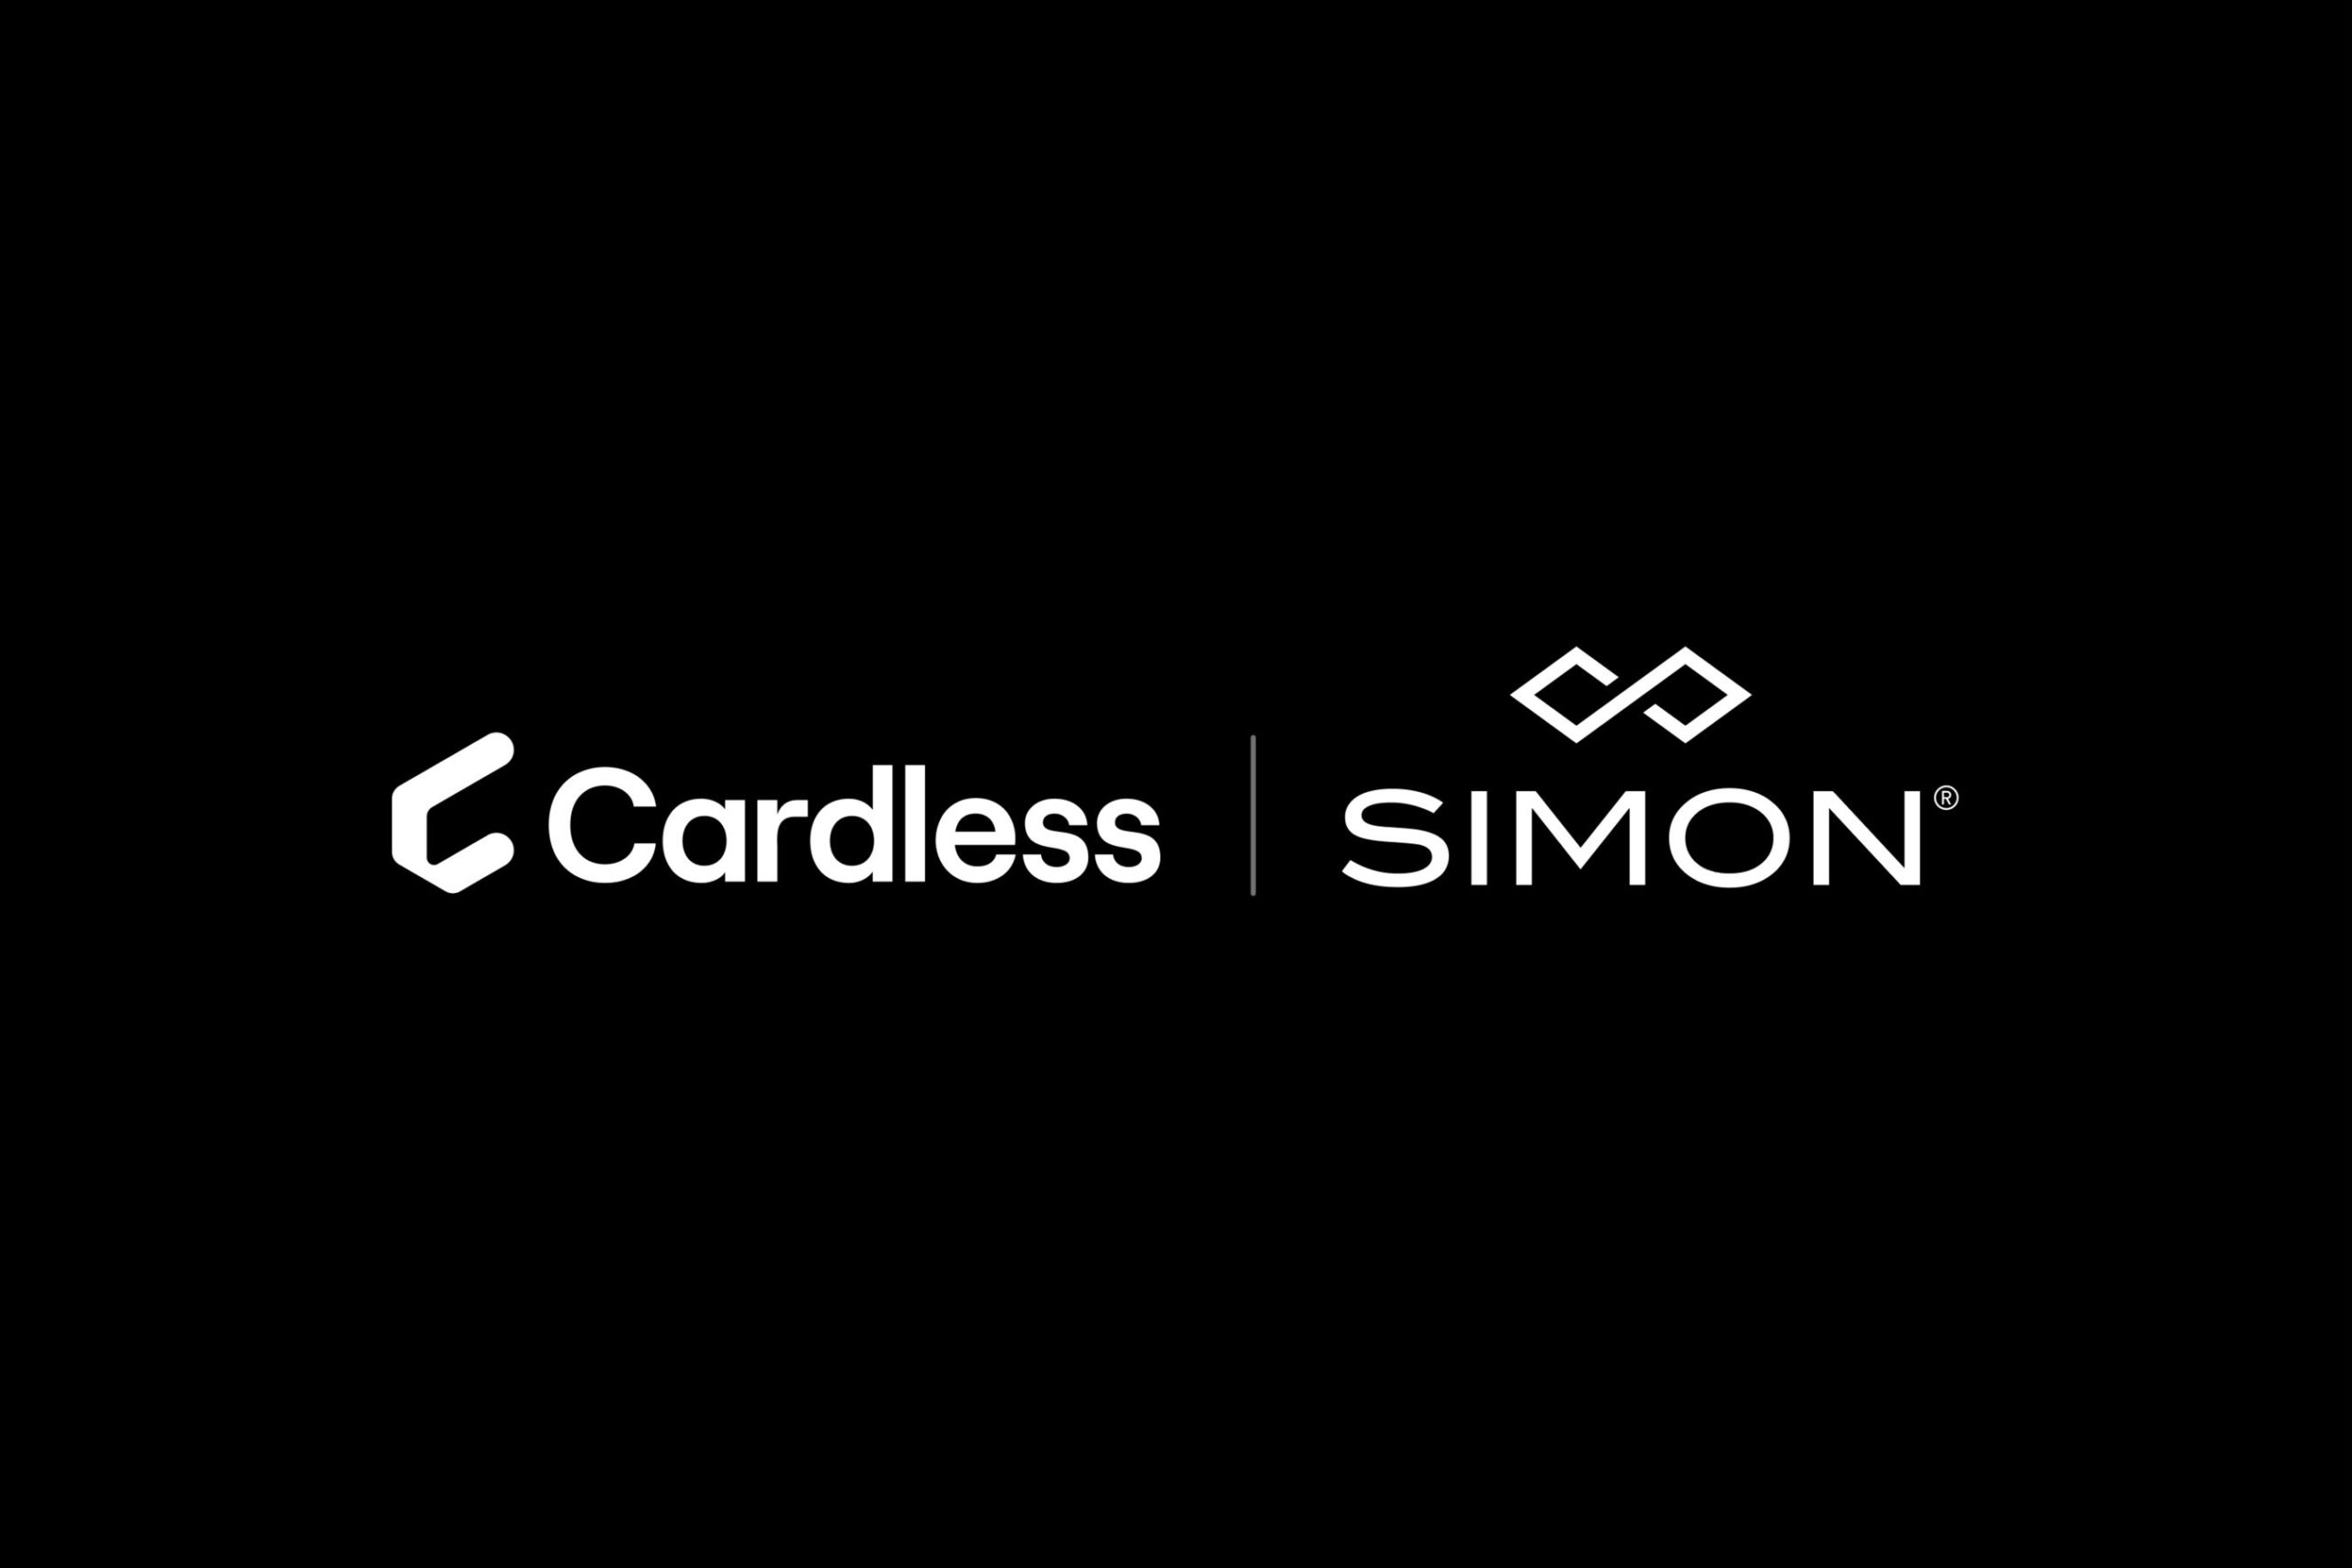 Simon American Express Credit Card from Cardless